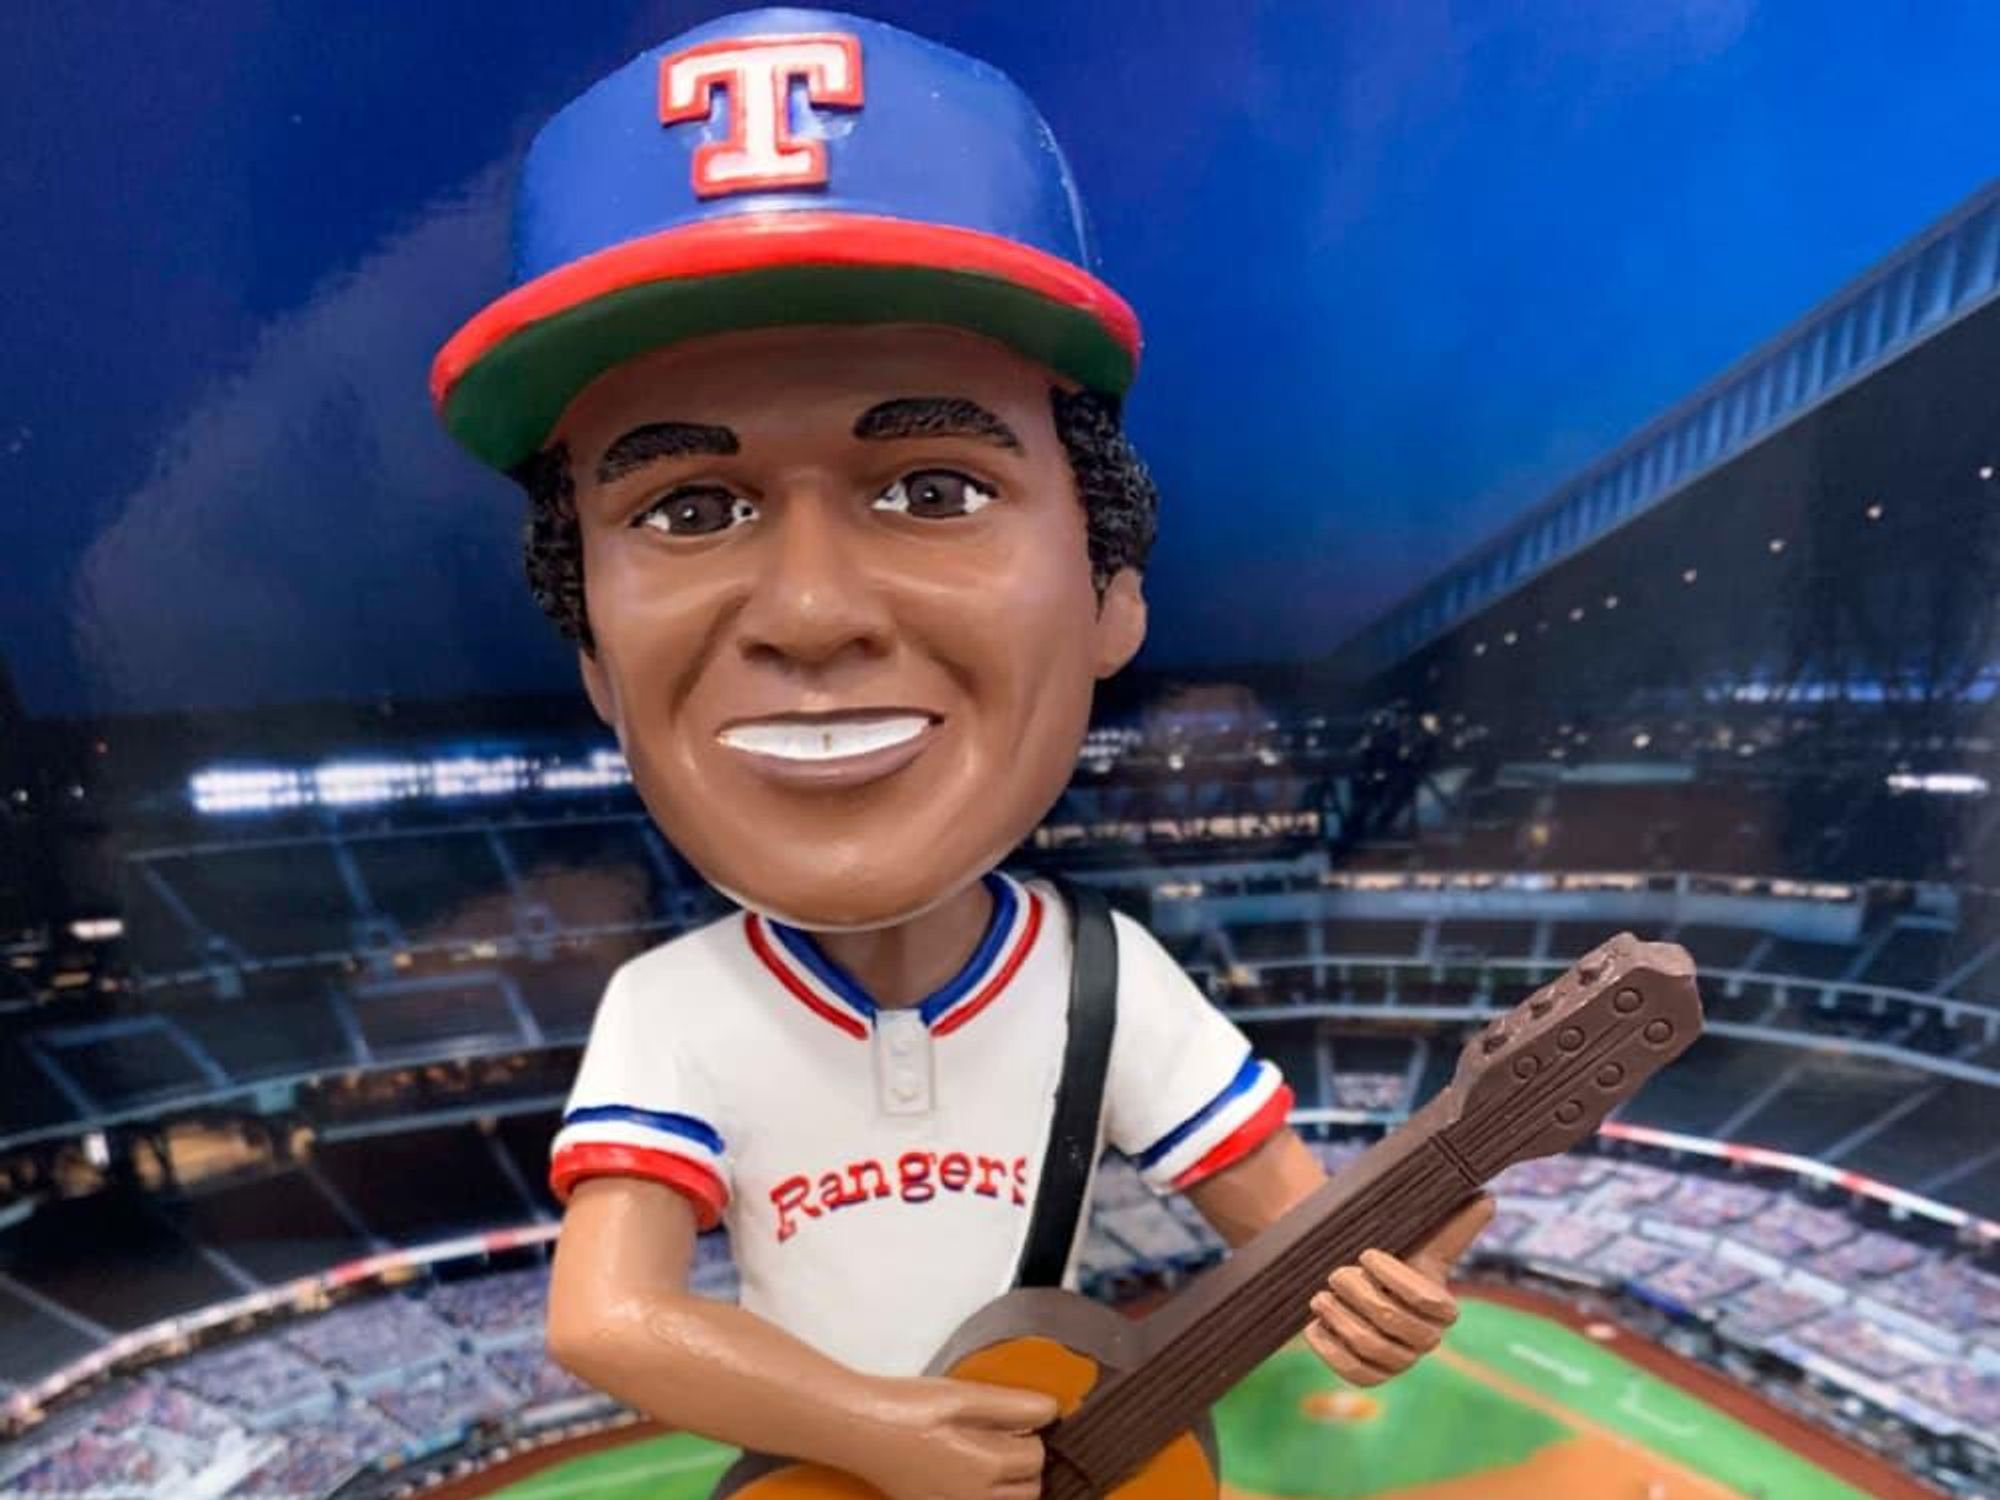 Texas Rangers promotional schedule includes 11 bobbleheads